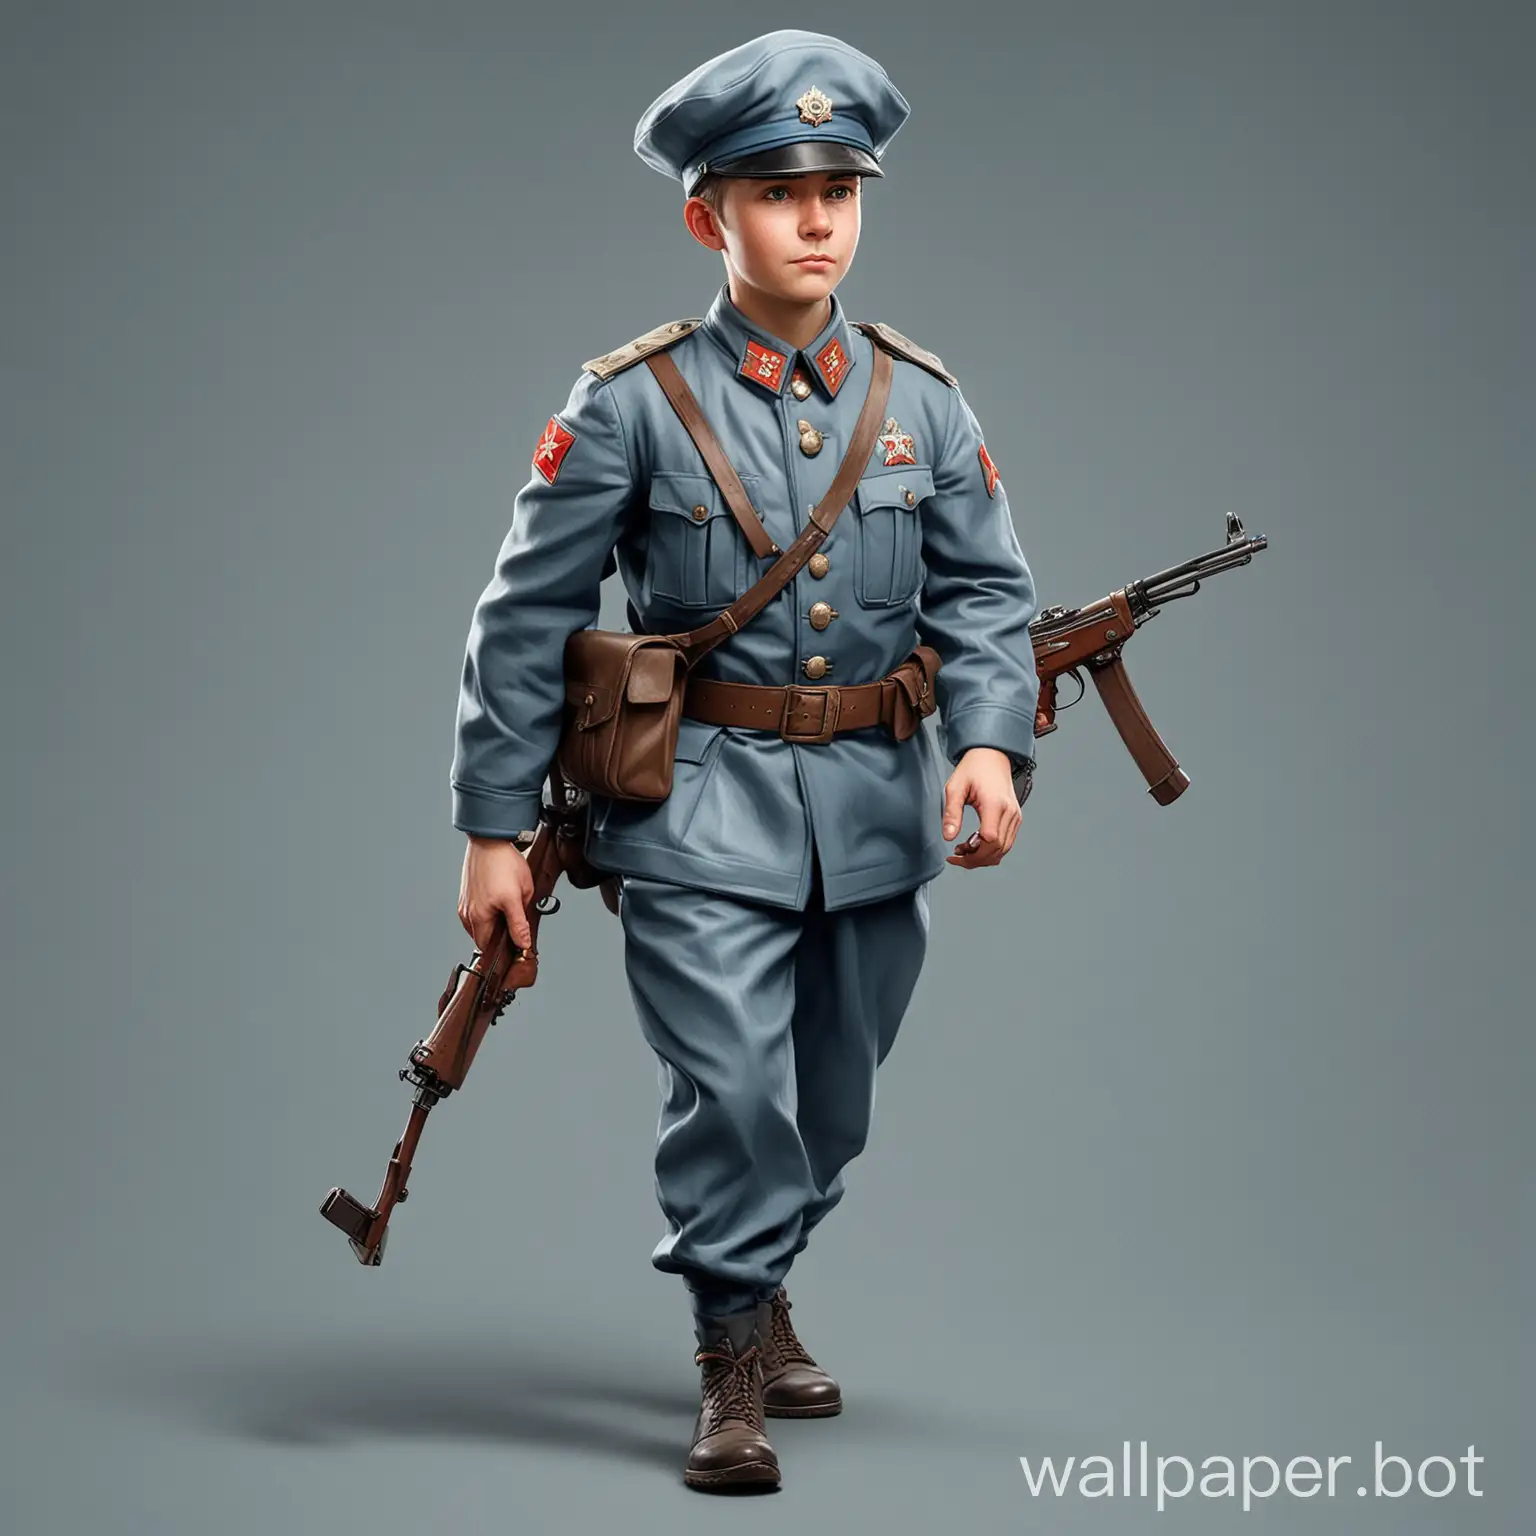 a Red Army soldier, carrying a gun, wearing an octagonal hat, in grey-blue military uniform, cute design, IP design